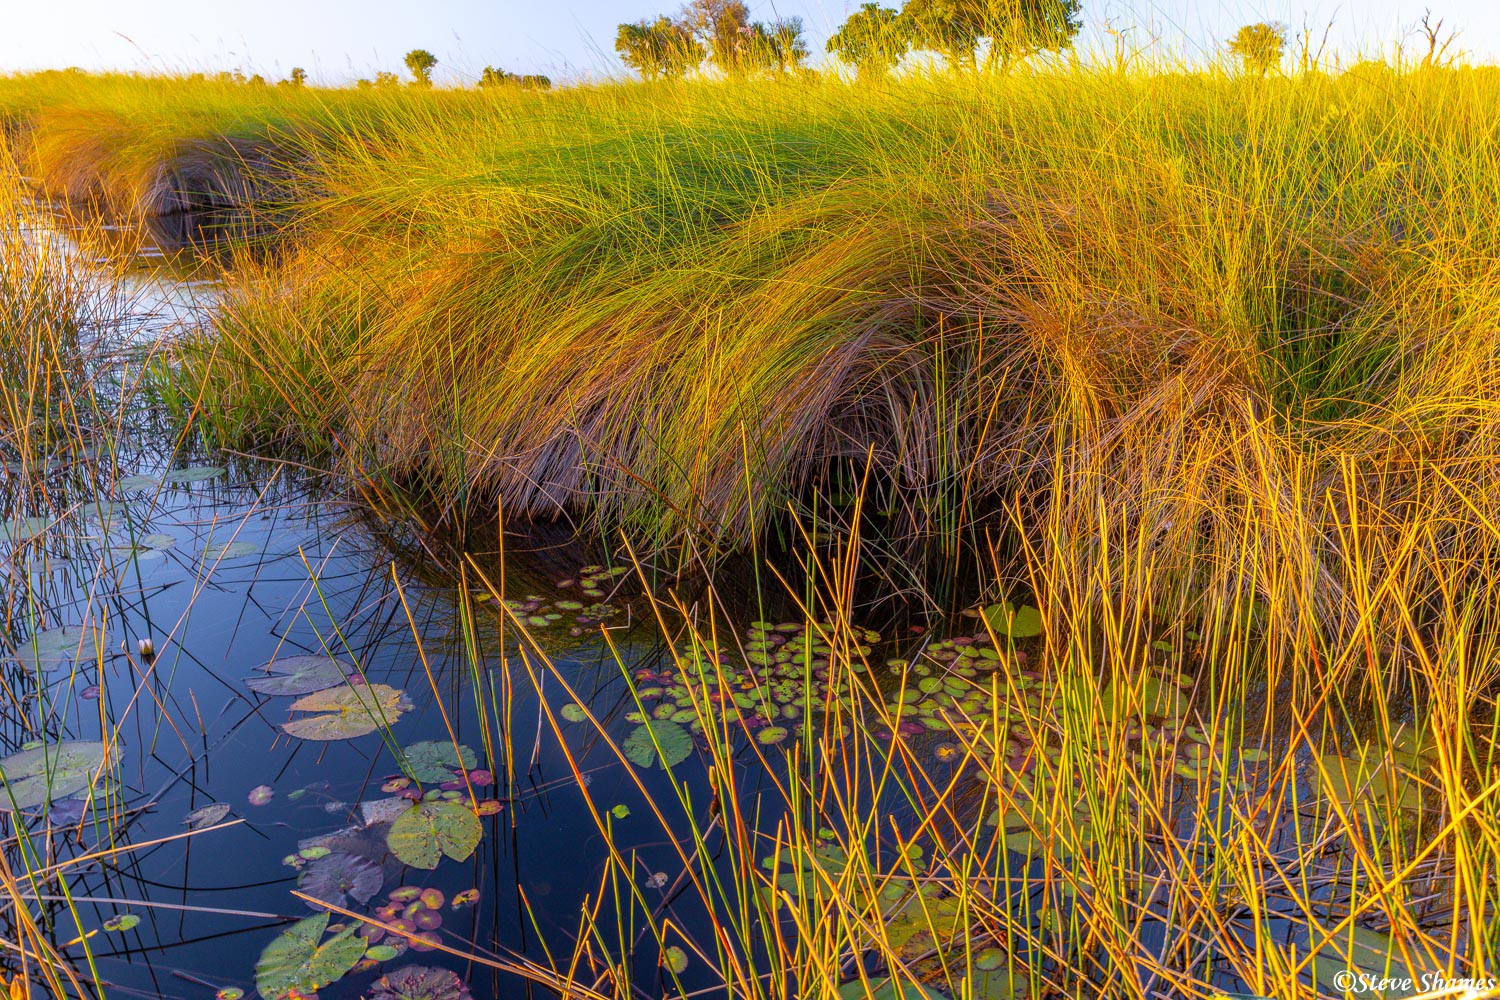 There is no shortage of thick grass in the Okavango Delta. I thought this curly segment had a scenic quality.